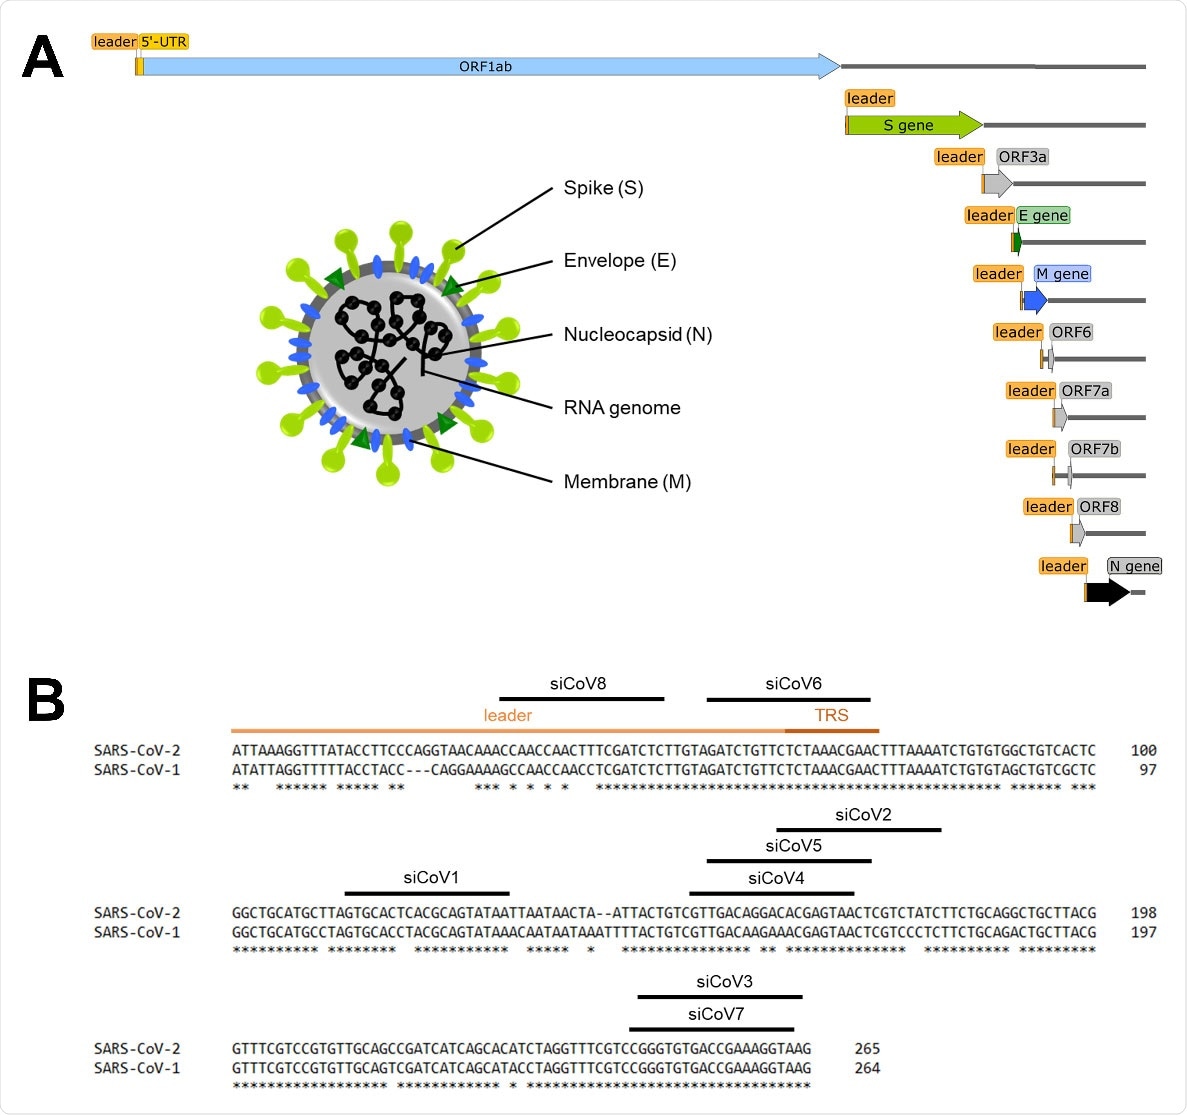 Schematic overview of the SARS‐CoV‐2 genome and target sequences of the siRNAs in the 5’‐UTR. (A) Schematic overview of the SARS‐CoV‐2 genome, the subgenomic RNAs and the virion structure. The coronavirus virion consists of the structural spike protein (S), envelope protein (E), membrane protein (M) and nucleoprotein (N). The single‐stranded RNA genome with positive polarity is encapsulated by N, while S‐trimers protrude from the host‐derived virus envelope and enable binding to new host cells. In addition to the genomic RNA, nine subgenomic RNAs are synthesized during replication, all of which share the same 5’‐ and 3’‐ends. The orange box represents the mutual 5’‐end, the leader sequence. (B) Target sequences of the siRNAs in the 5’‐UTR of SARS‐CoV‐2. The leader sequence (light orange) and the transcription regulatory sequence (TRS, dark orange) can be found at the 5’‐end of the genomic and subgenomic RNAs. Nucleotides without an asterisk differ from the SARS‐CoV‐1 5’‐UTR sequence.